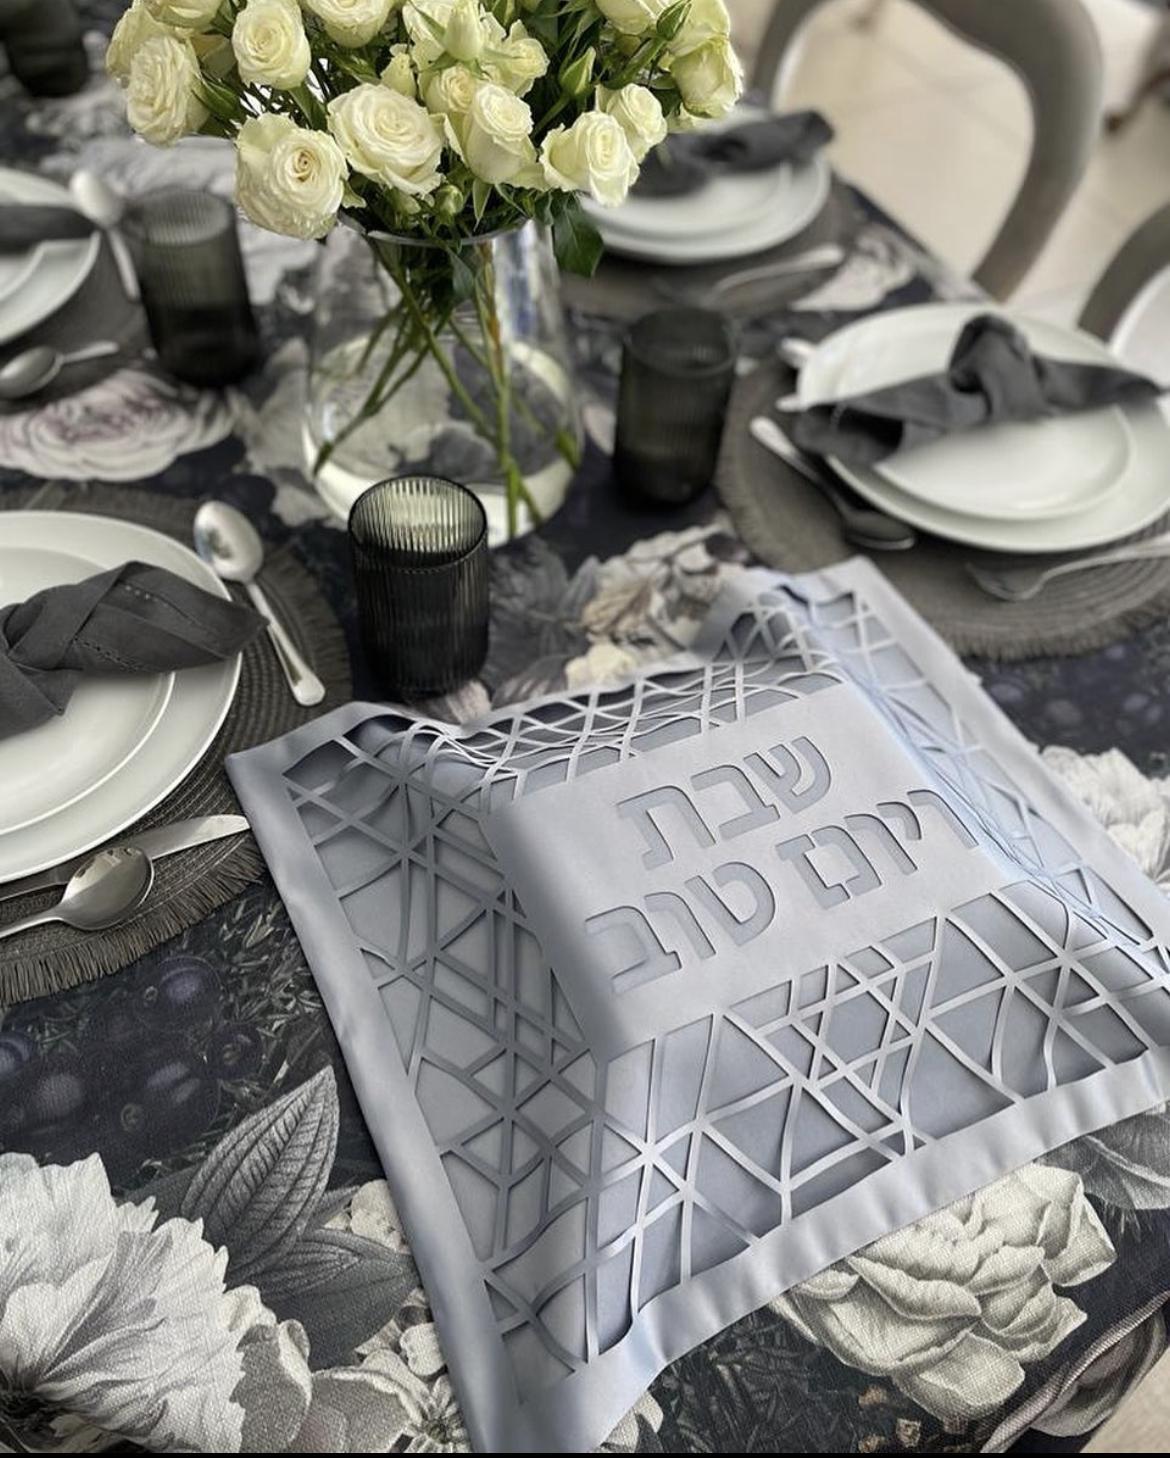 LIMITED EDITION! Silver Geometric Challah Cover (1 Count)